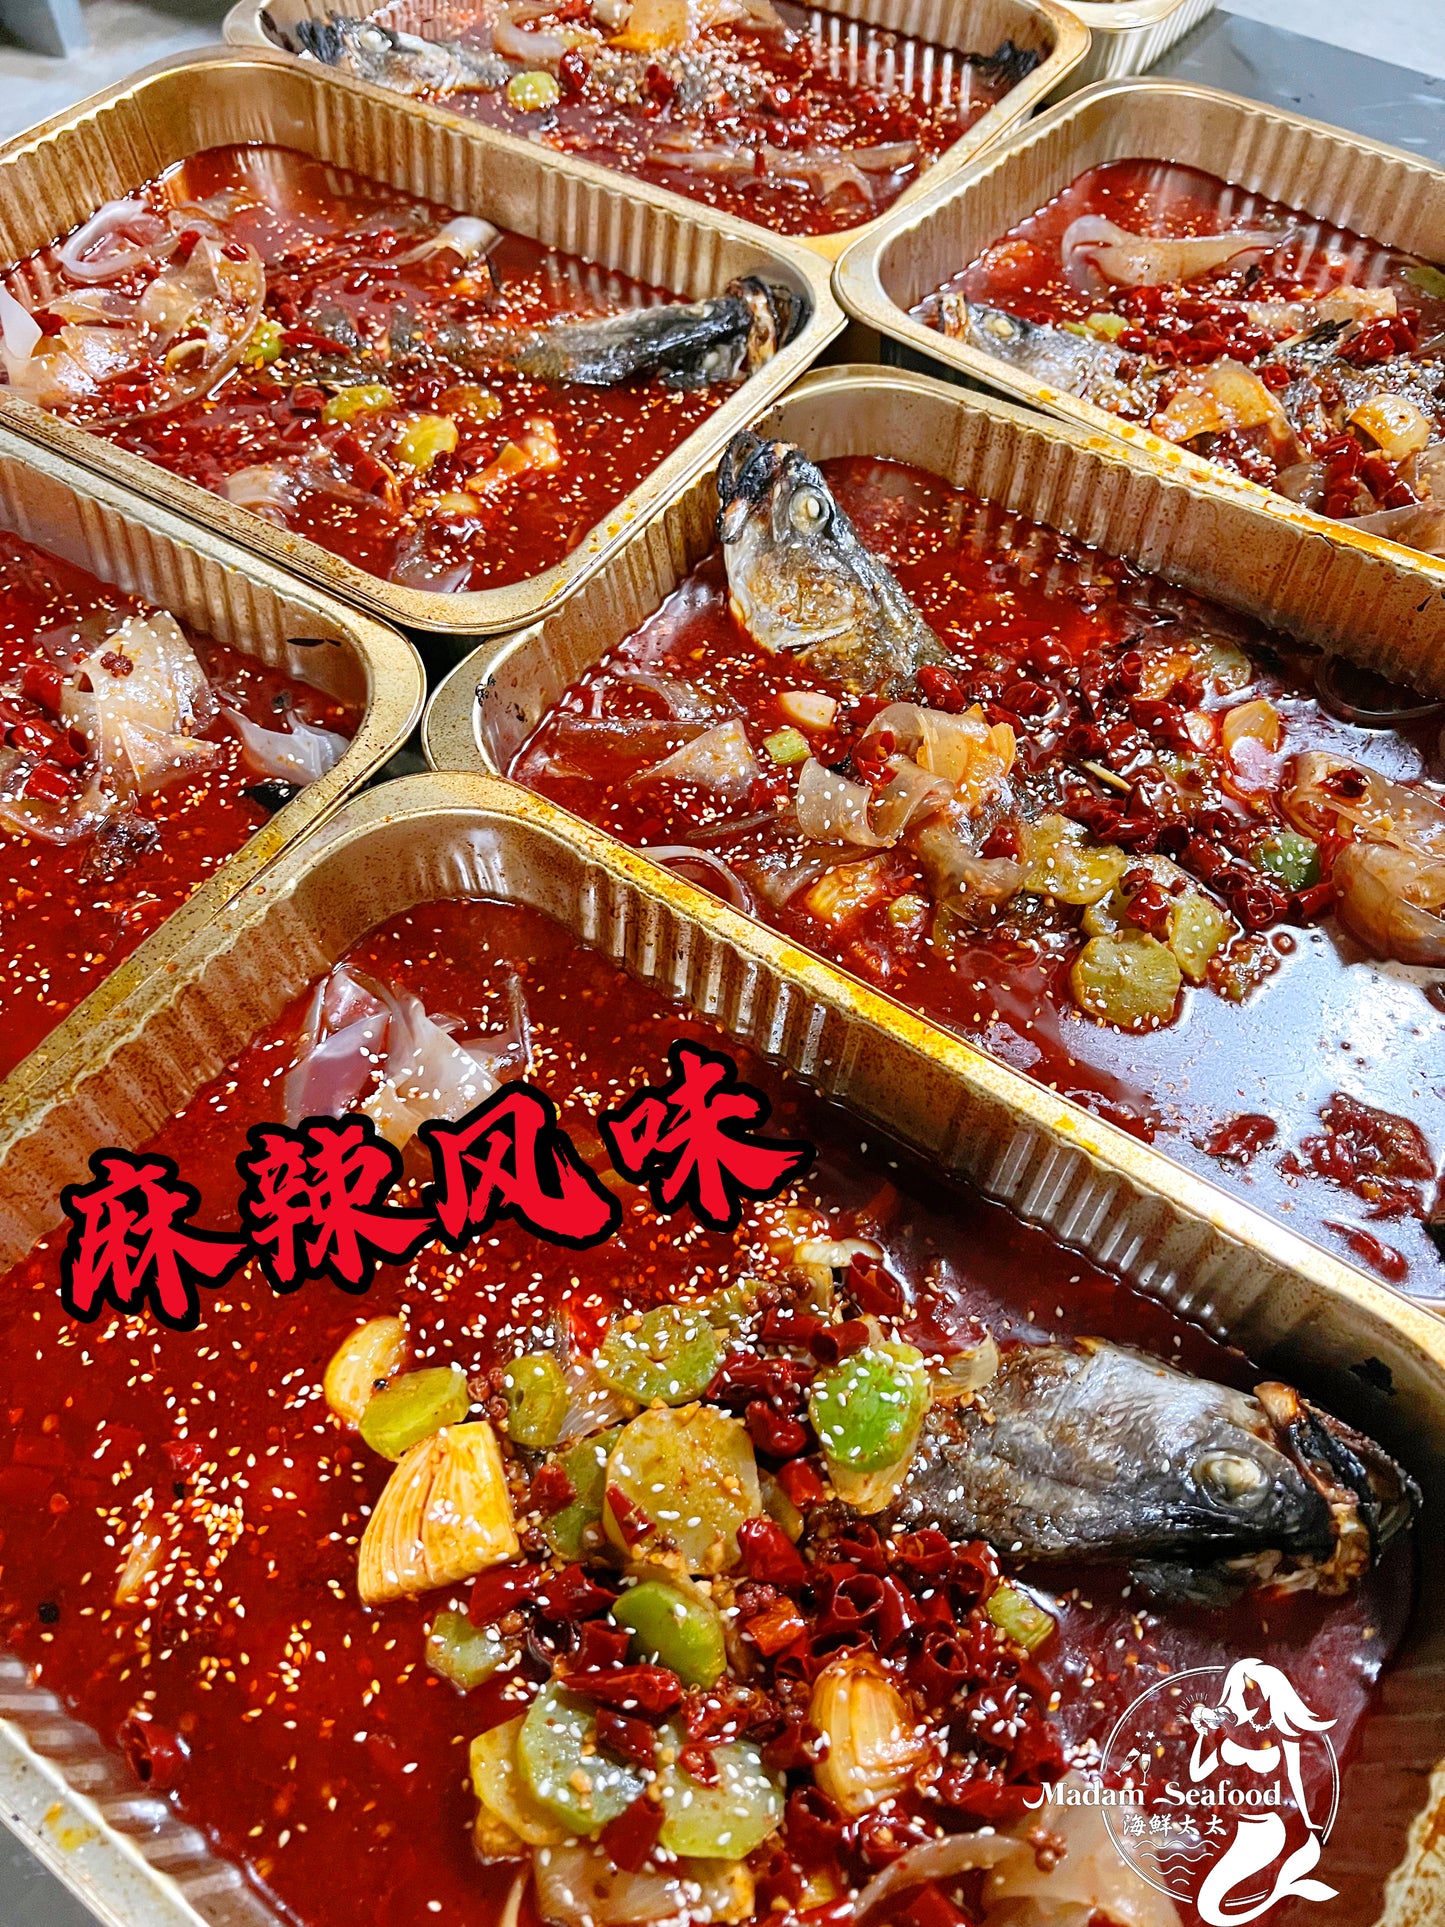 Jack's Grilled Live Fish 【杰克烤鱼】(cooked)